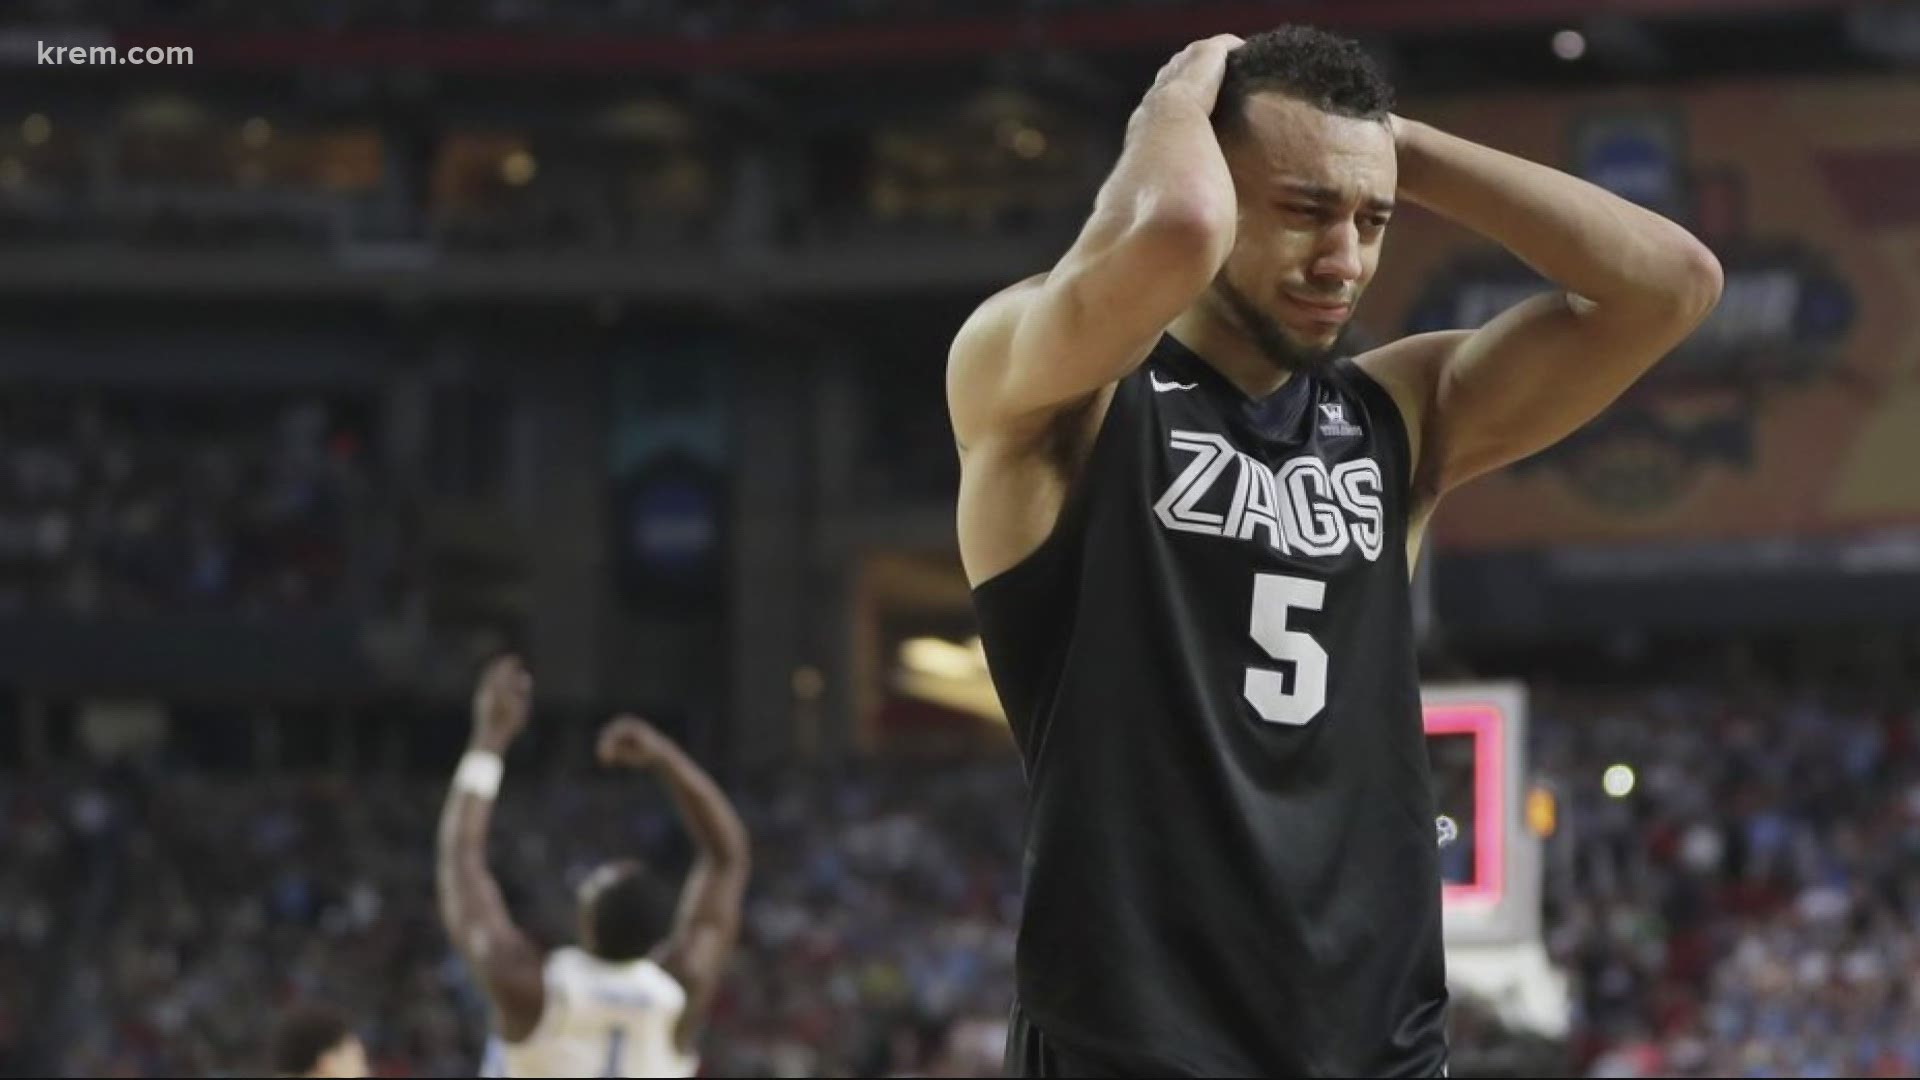 Many Zags fans believe that players walking onto the court in black jerseys heralds a crushing loss. But is there truth to the superstition? Former plays weigh in.